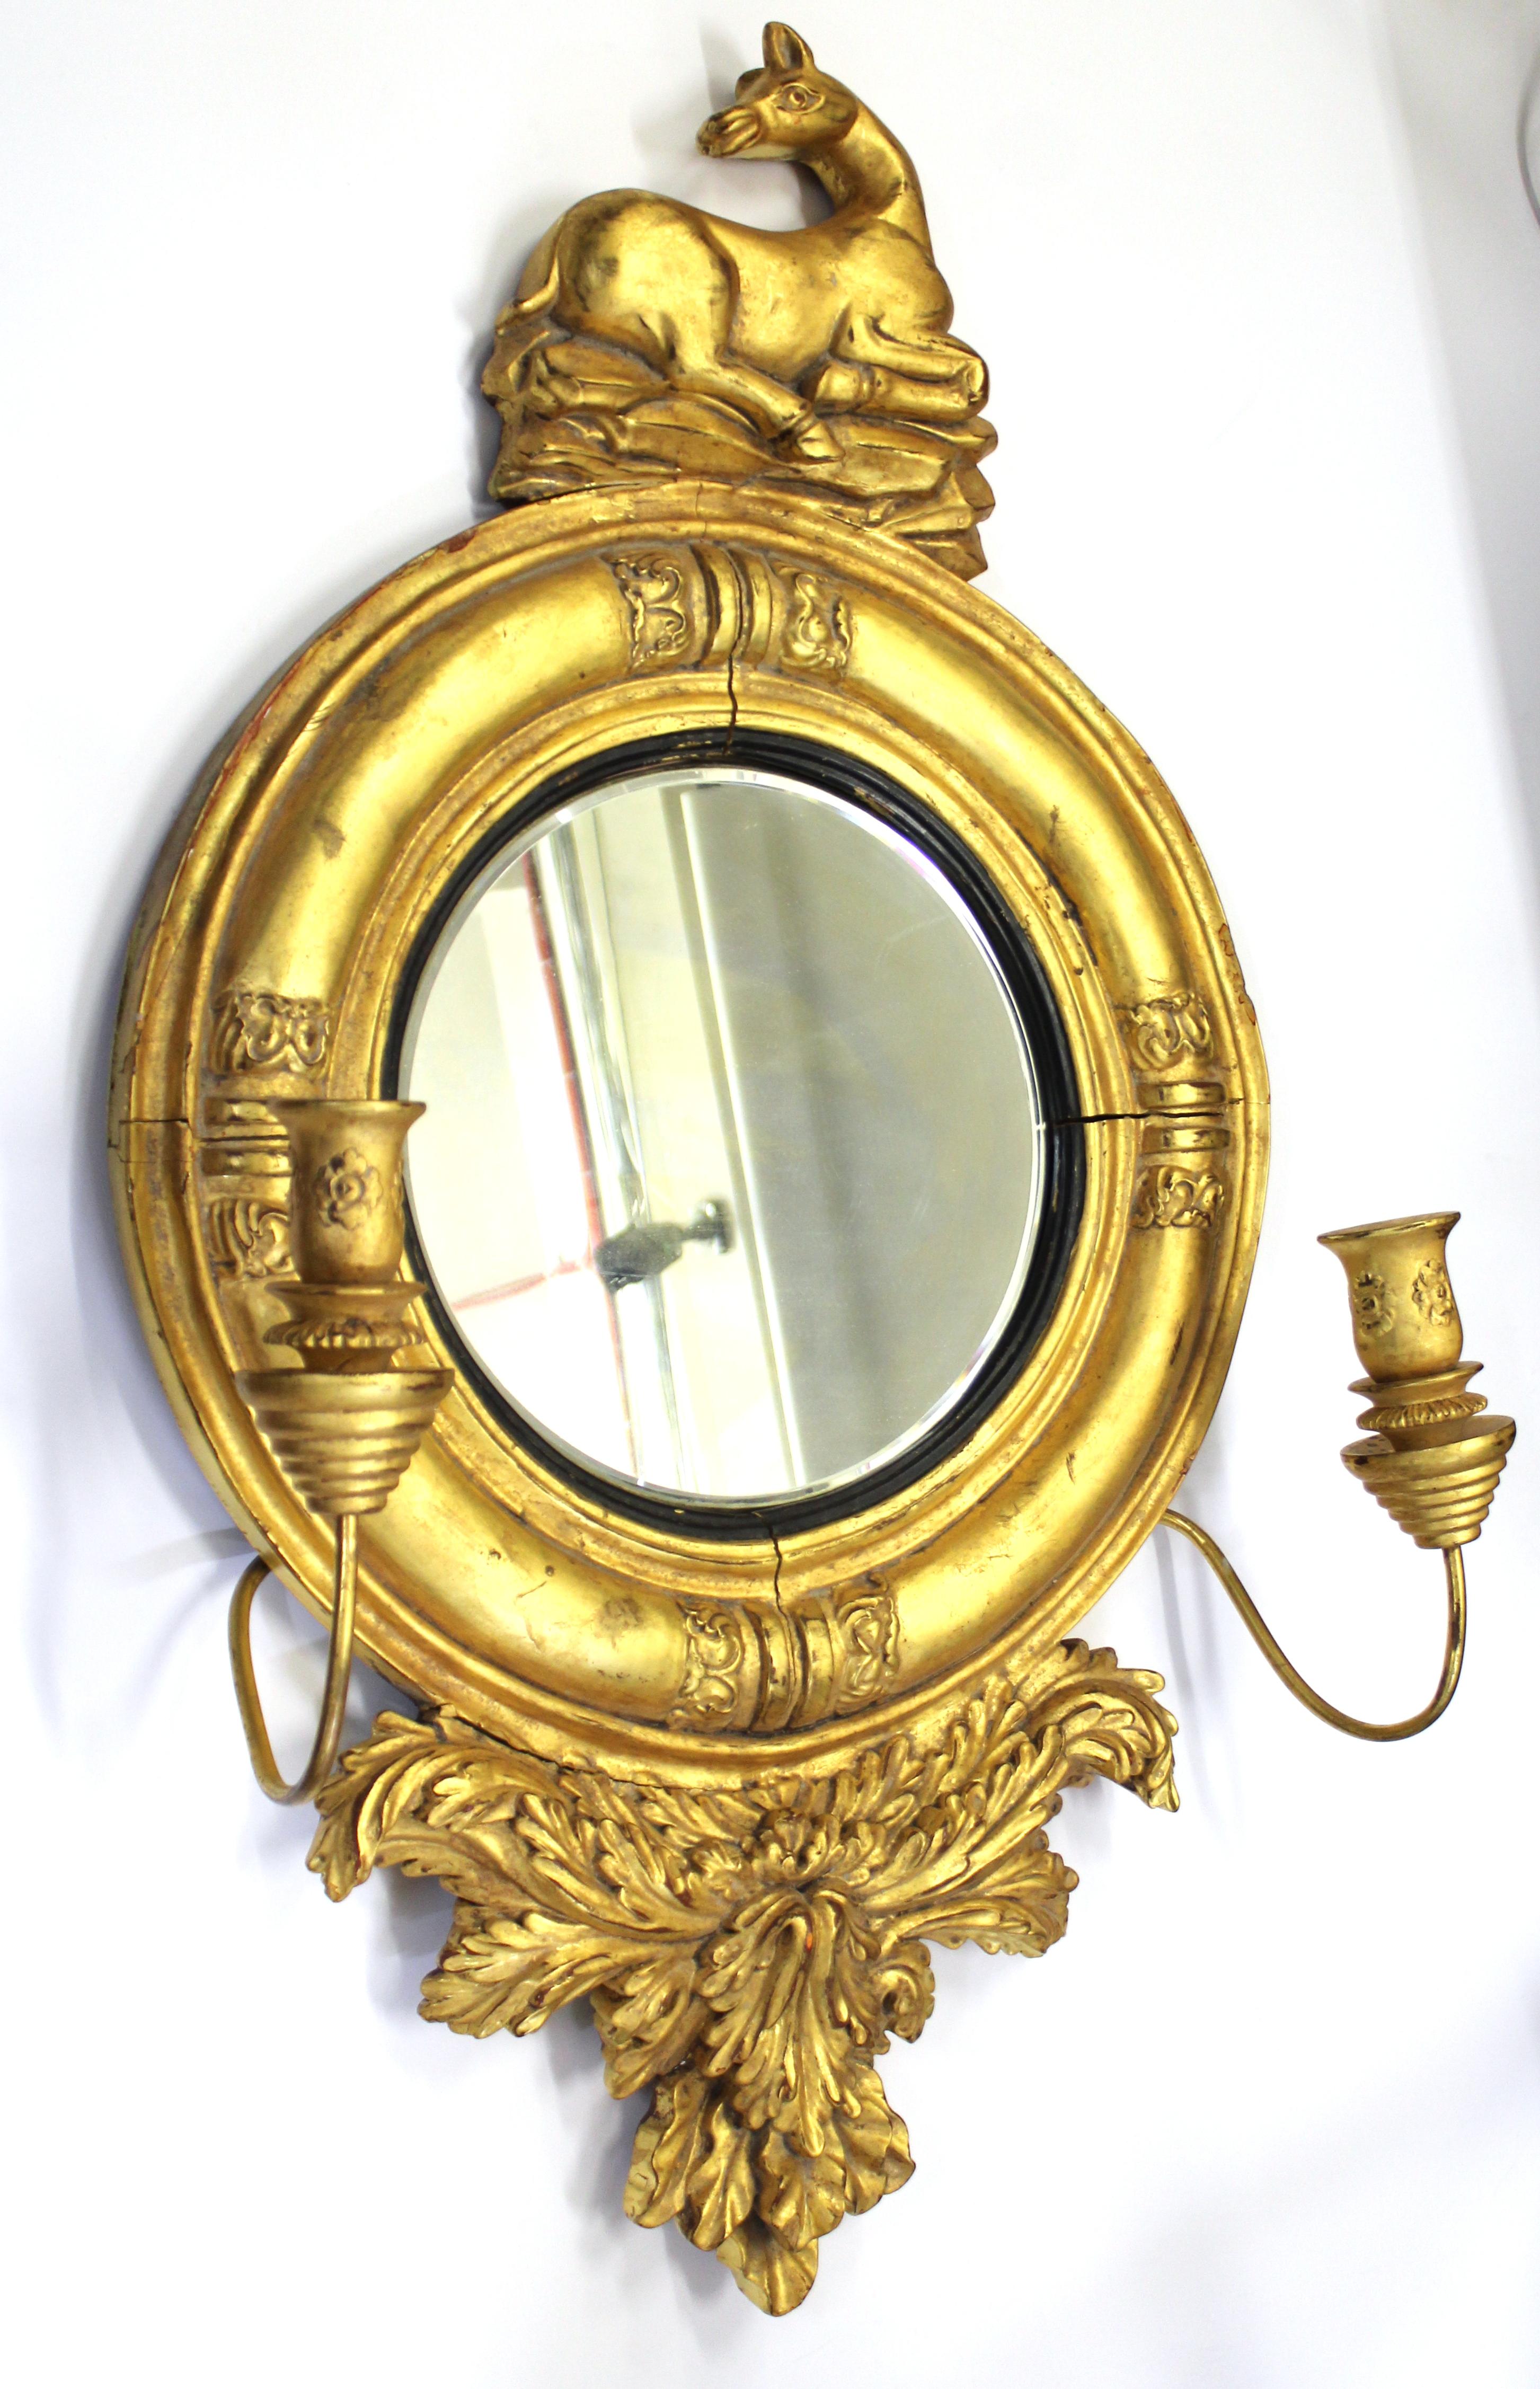 William IV style round girandole mirror made in giltwood, with decorative foliage and a resting heraldic animal surrounding a circular flat mirror with a half-rounded frame with carved lotus leaf clasps. Two candle-holding arms, one on each side of